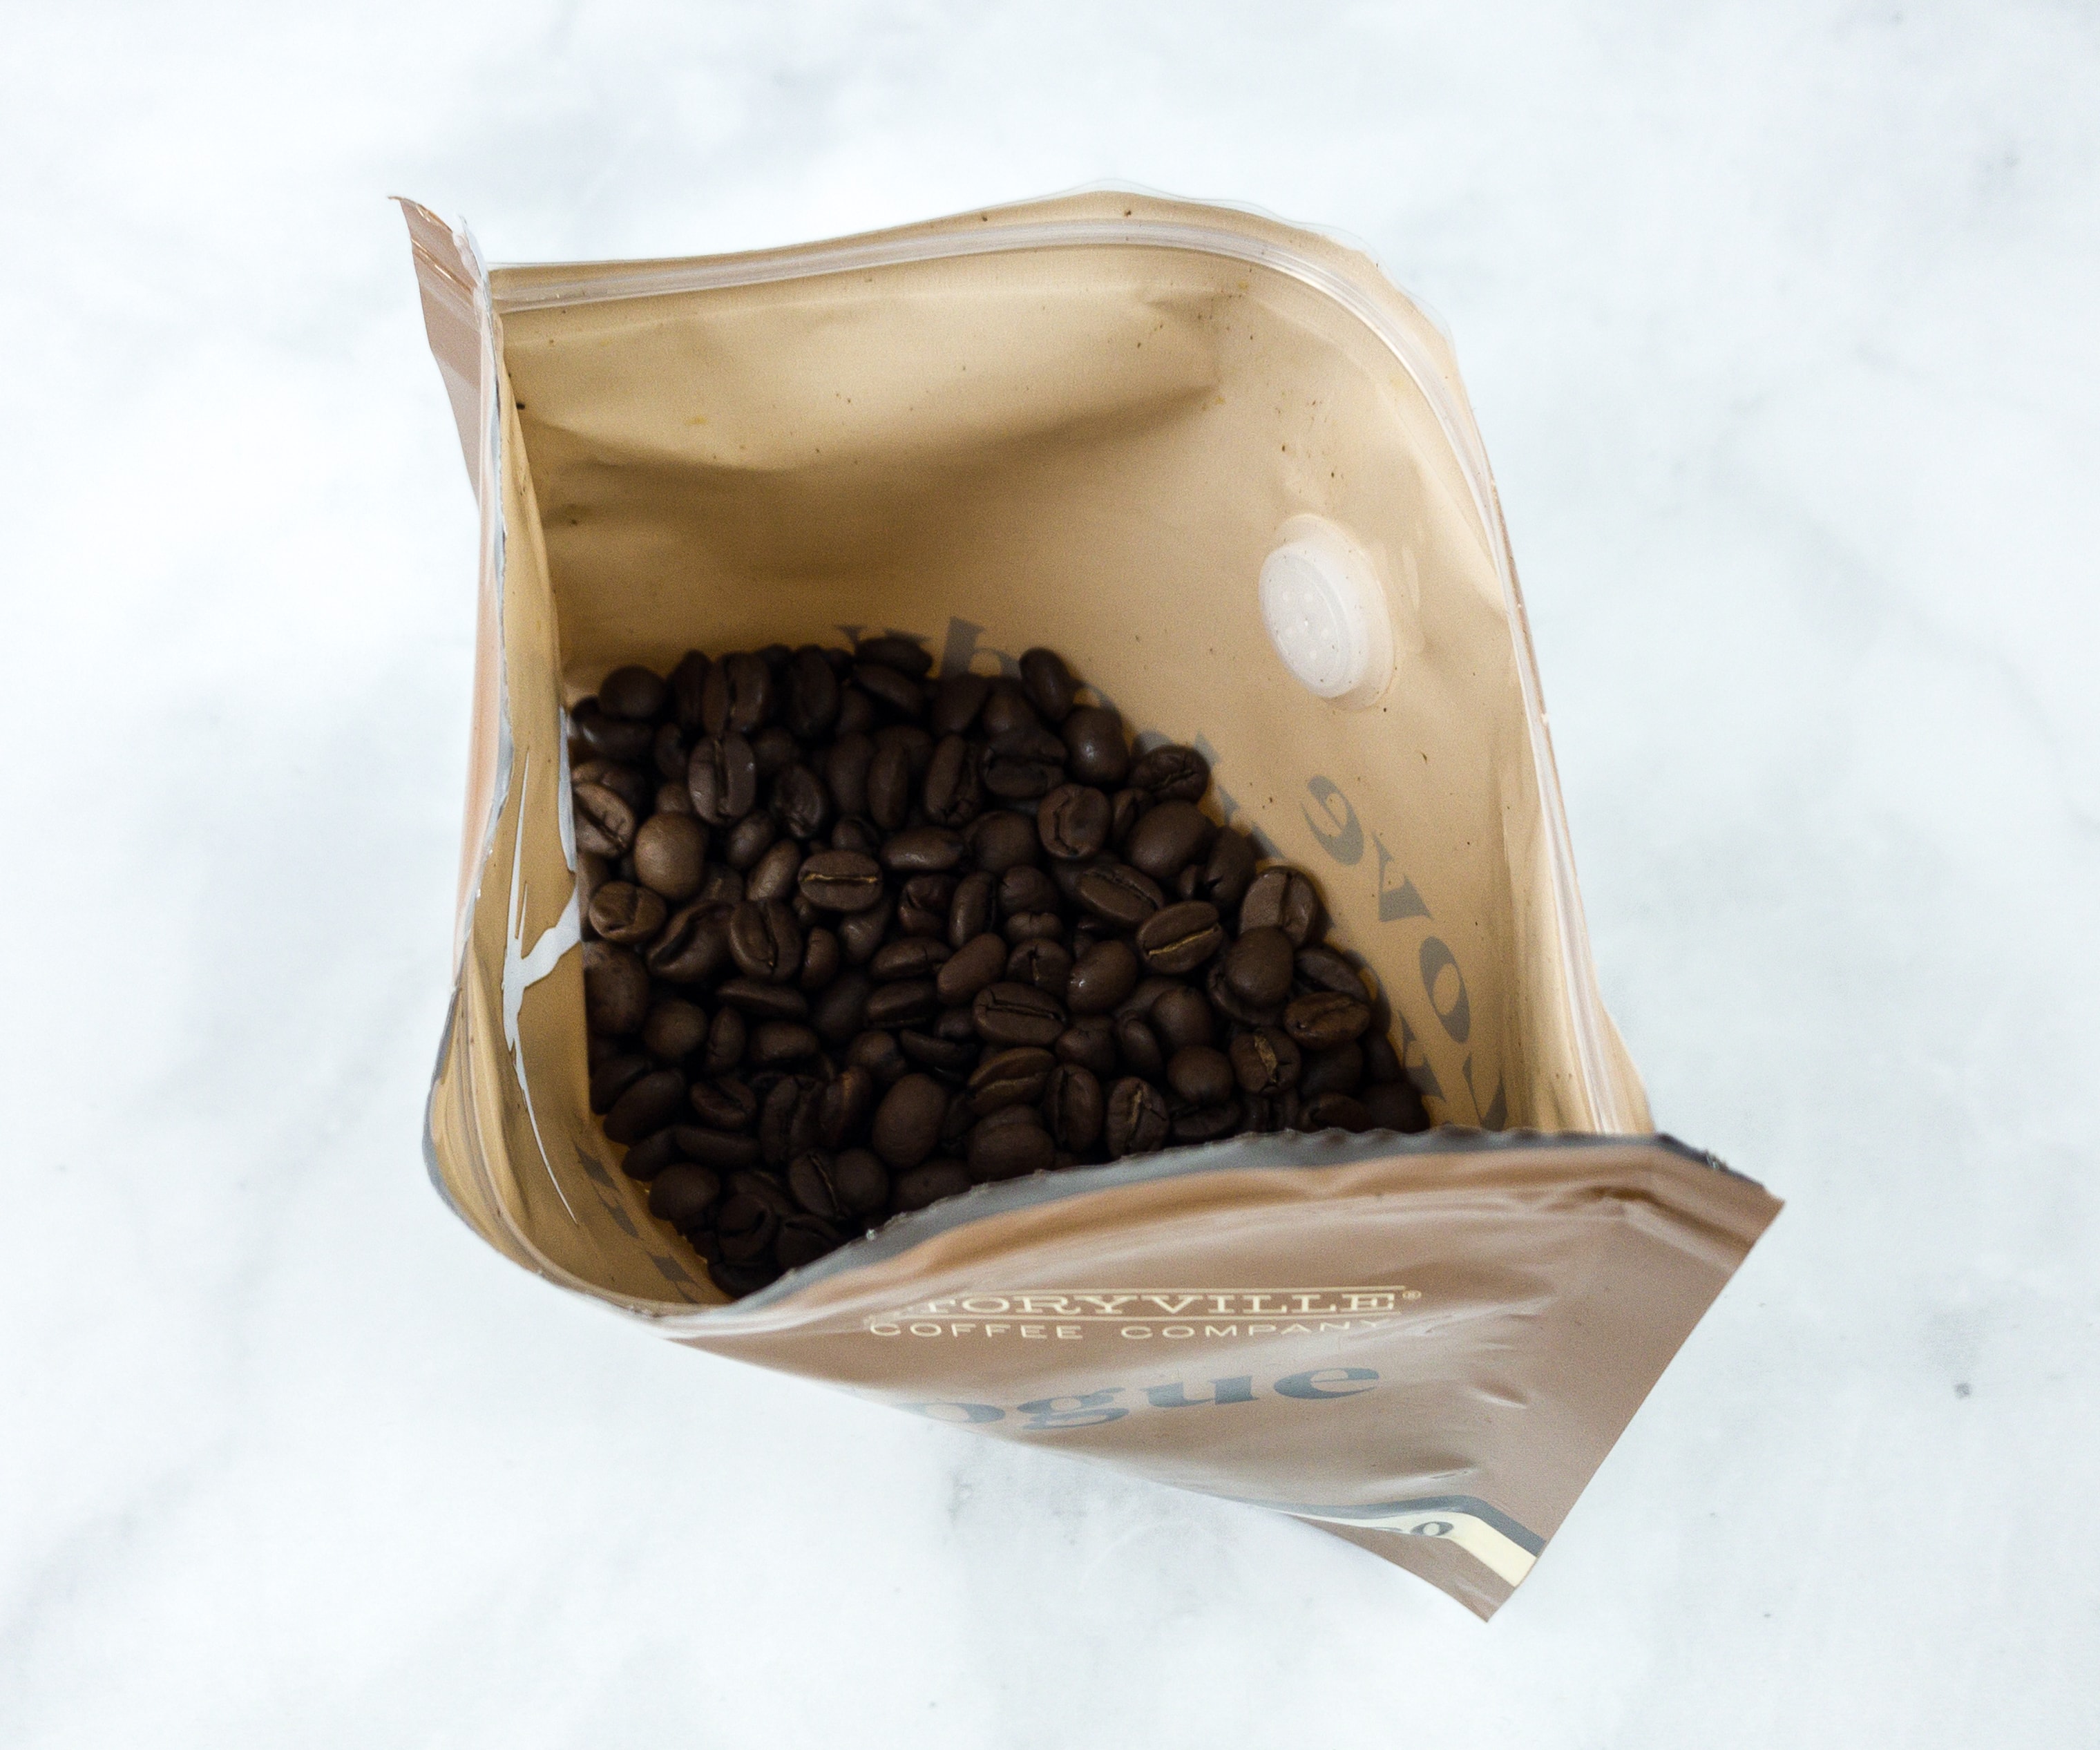 Coffee Subscription Service by Storyville – Storyville Coffee